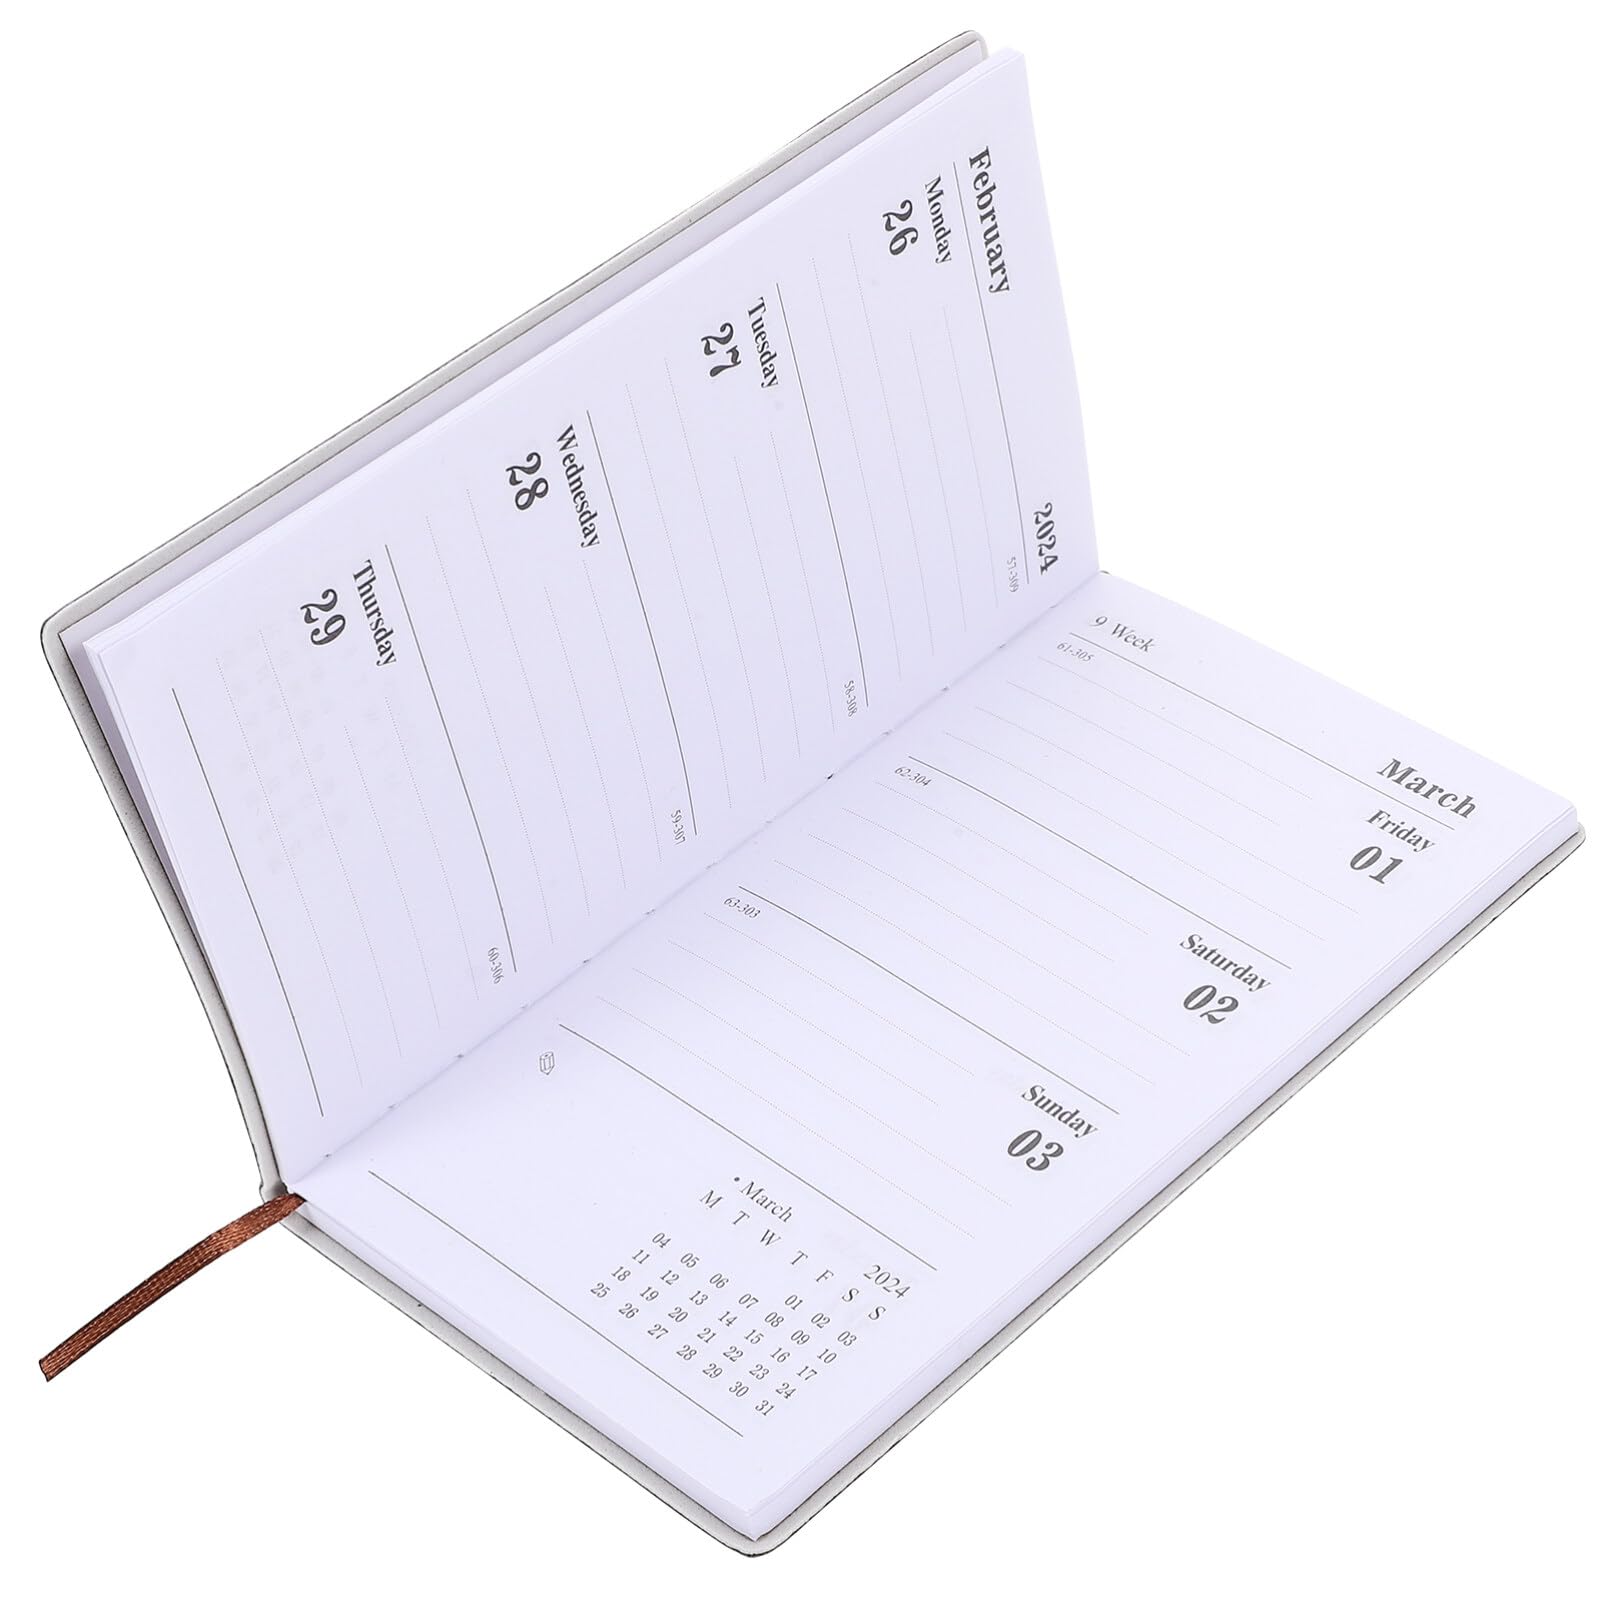 MAGICLULU 2024 Agenda Book Yearly Schedule Notepad Yearly Planner Notebook Yearly Notebook Monthly Planner Notepad Writing Notebook Multifunction Dividing Line Office Imitation Leather